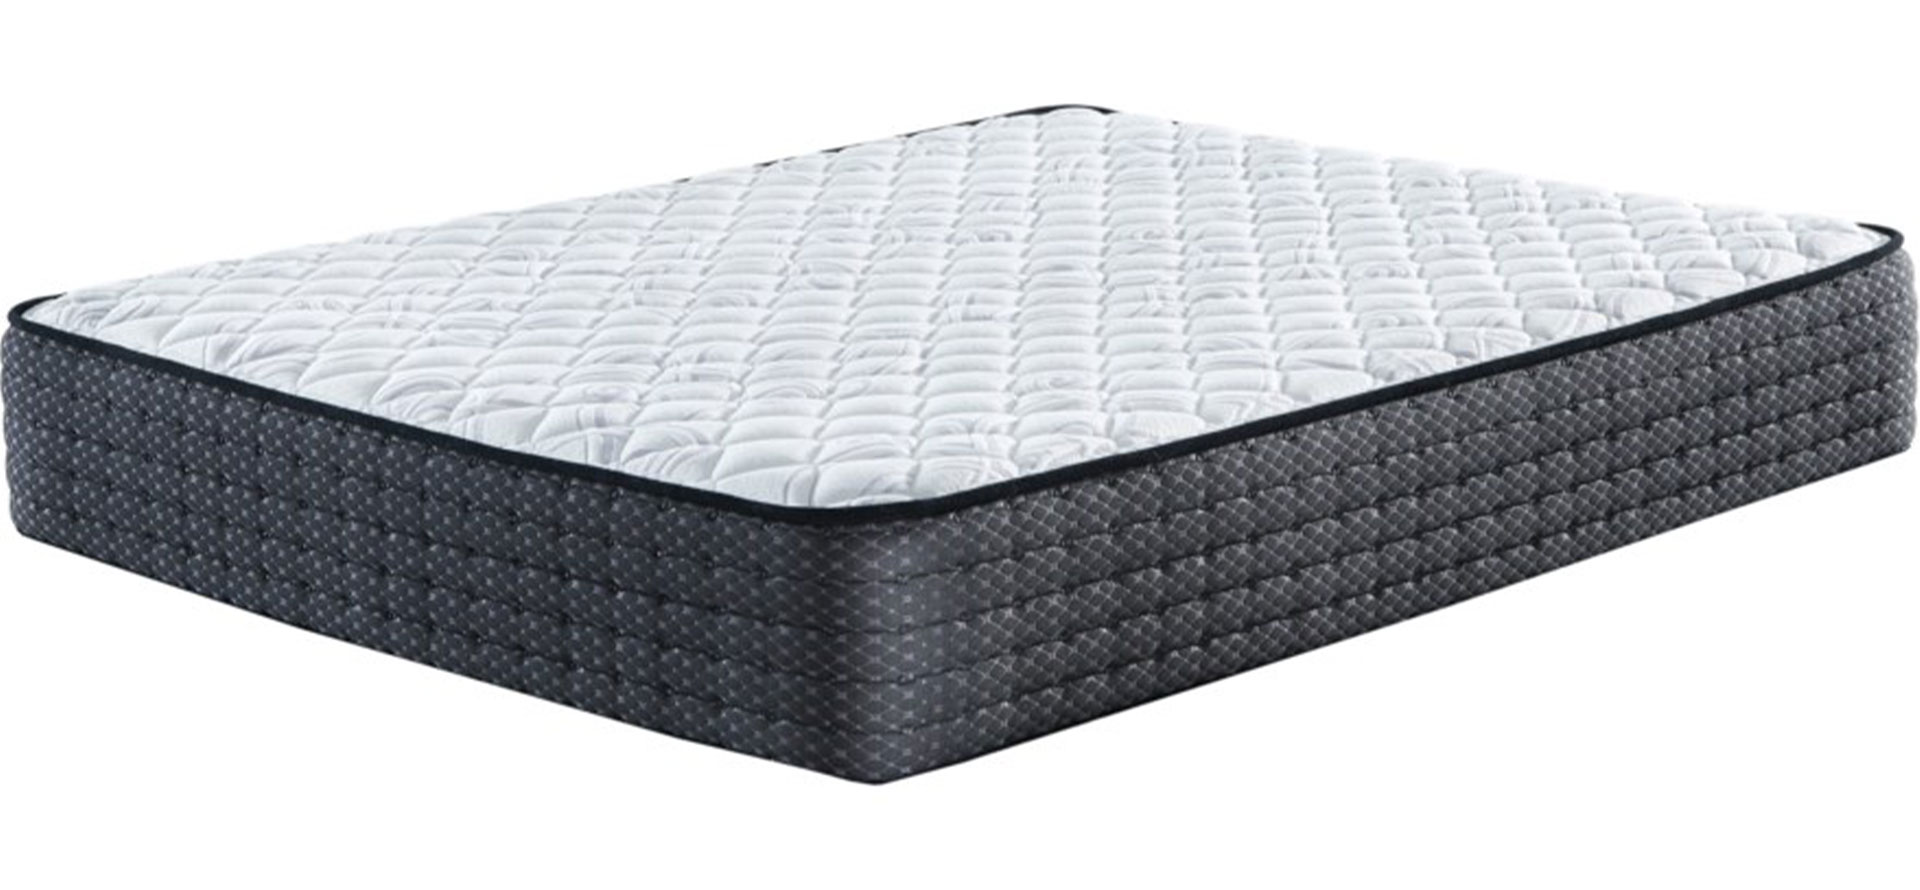 Olympic queen white mattress.